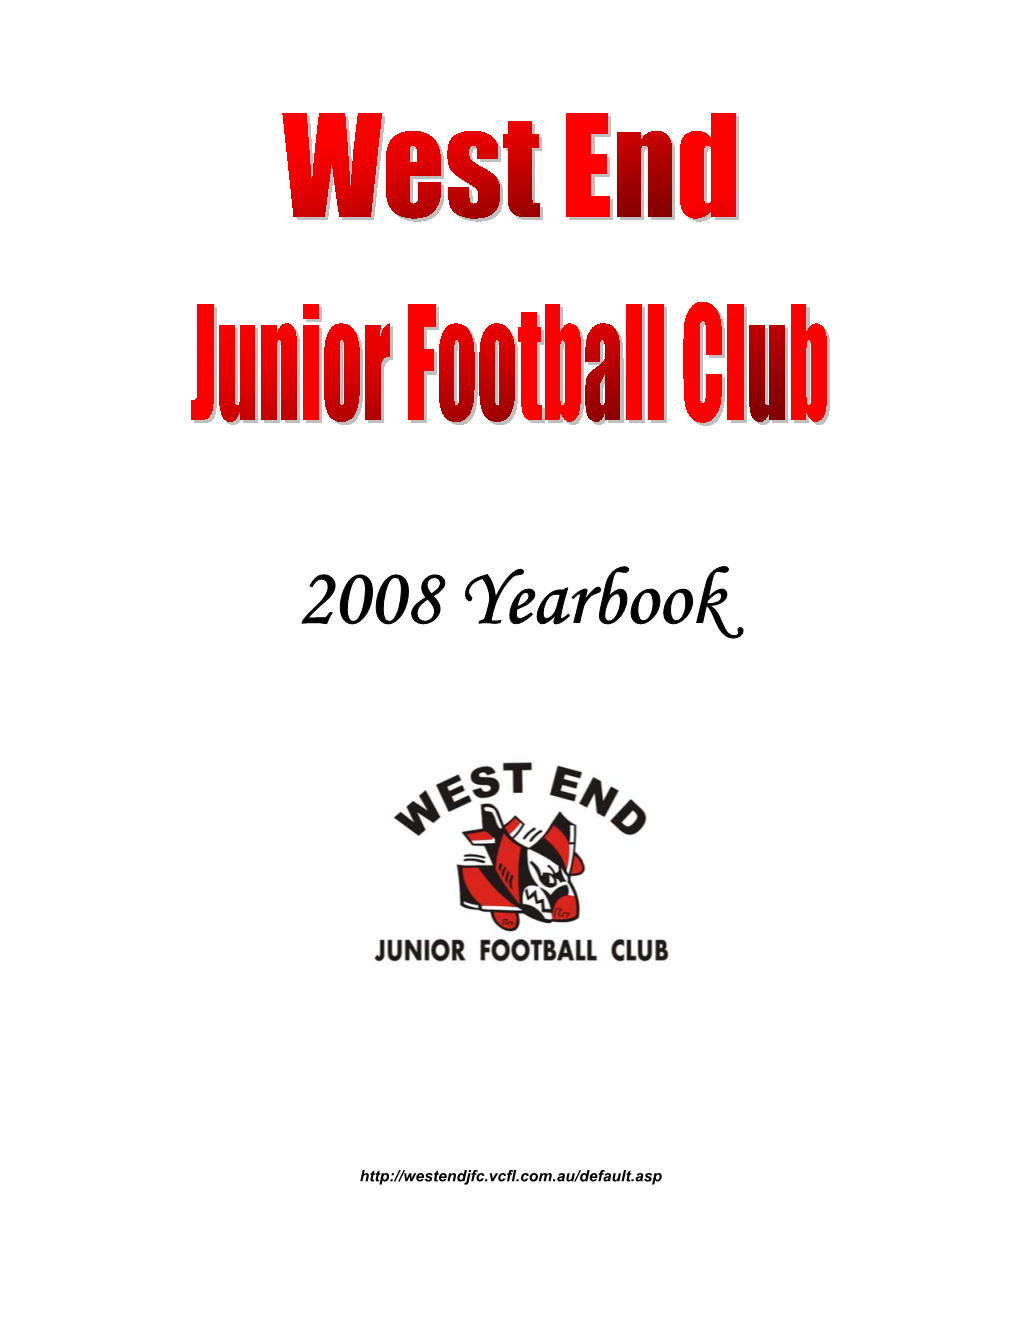 The West End JFC Committee